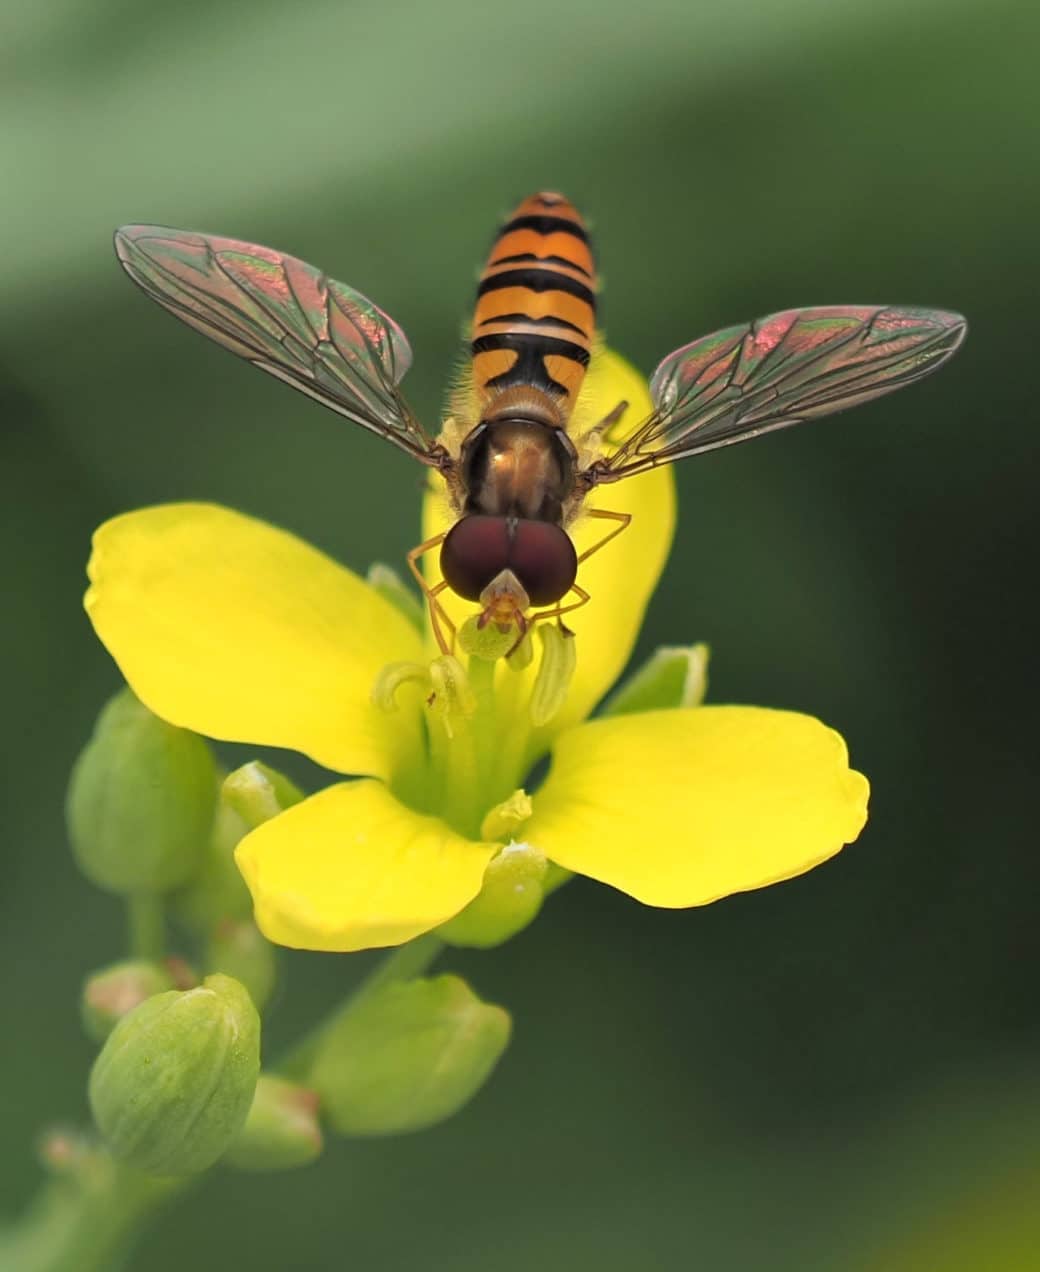 Picture: The photo shows a grove hoverfly, Latin Episyrphus balteatus, sitting with spread wings on a yellow flower and taking nectar.